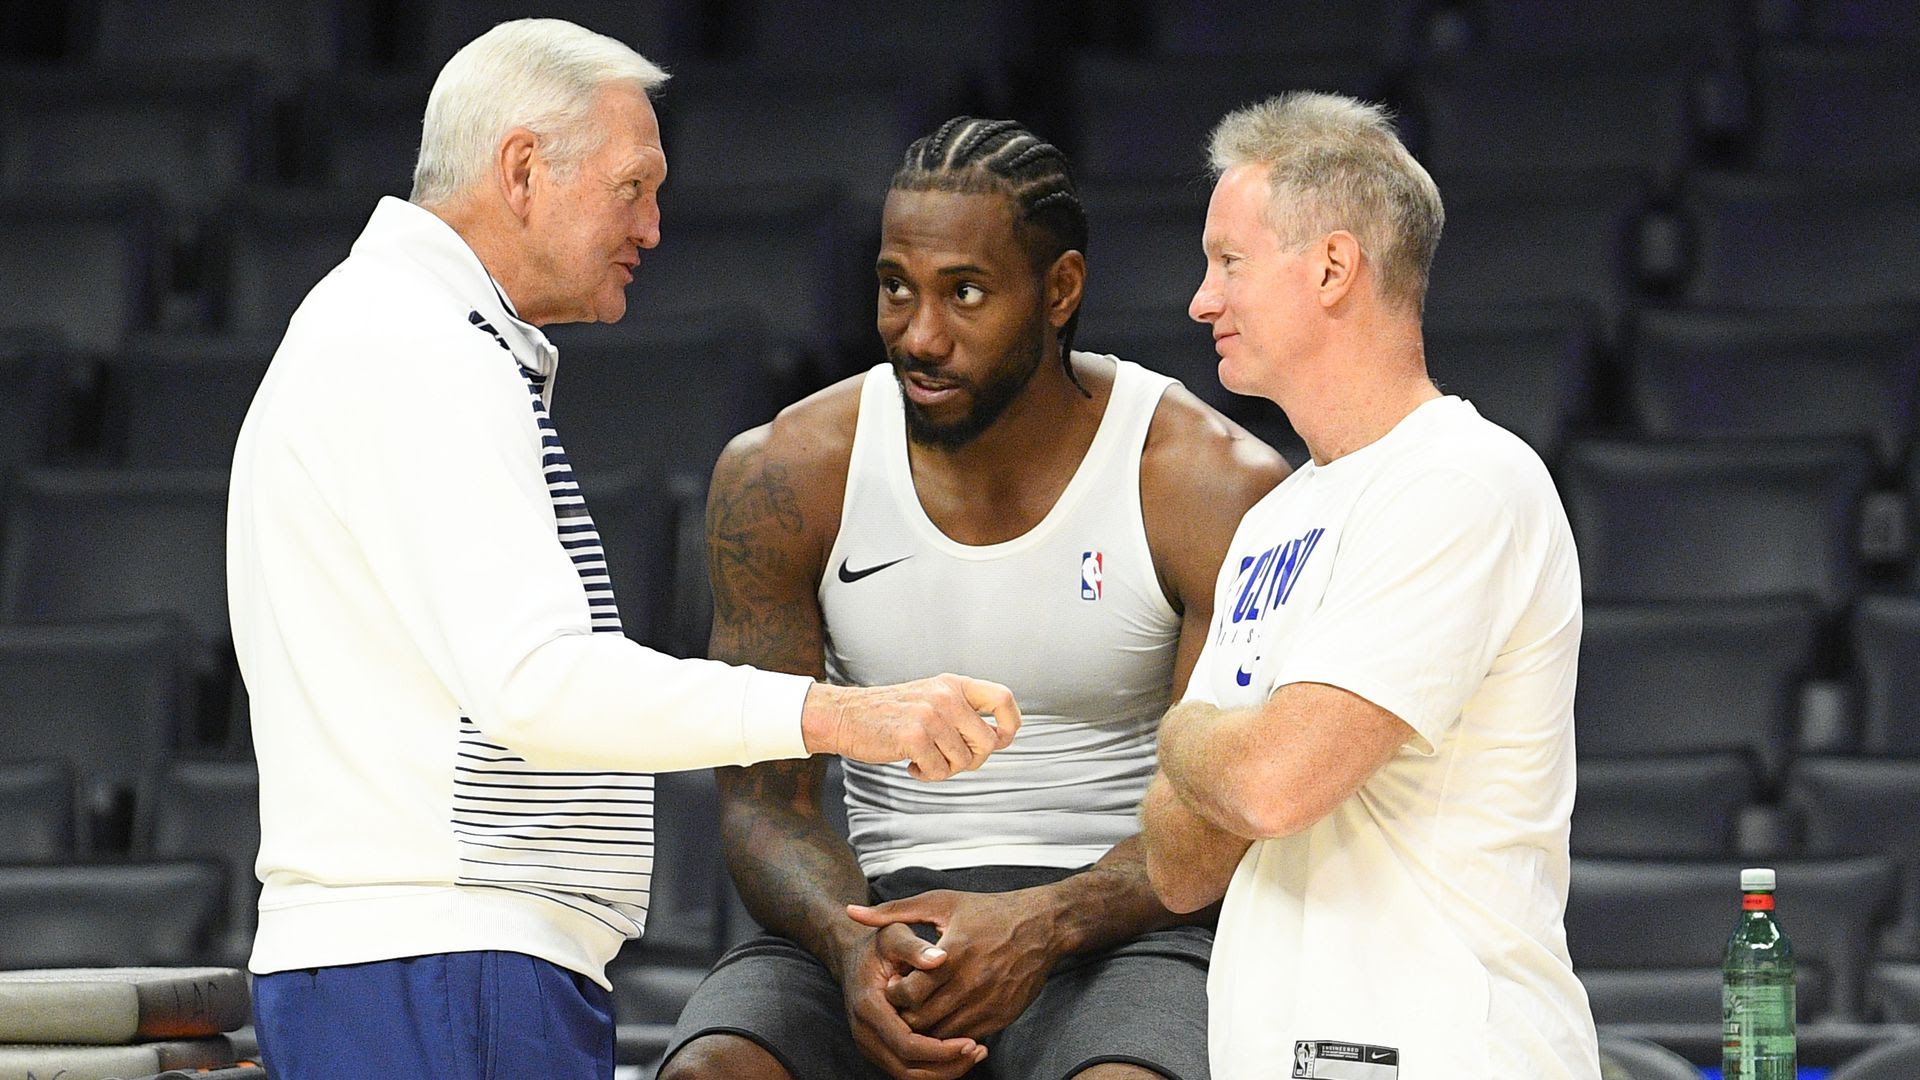 LA Clippers player Kawhi Leonard speaking with management